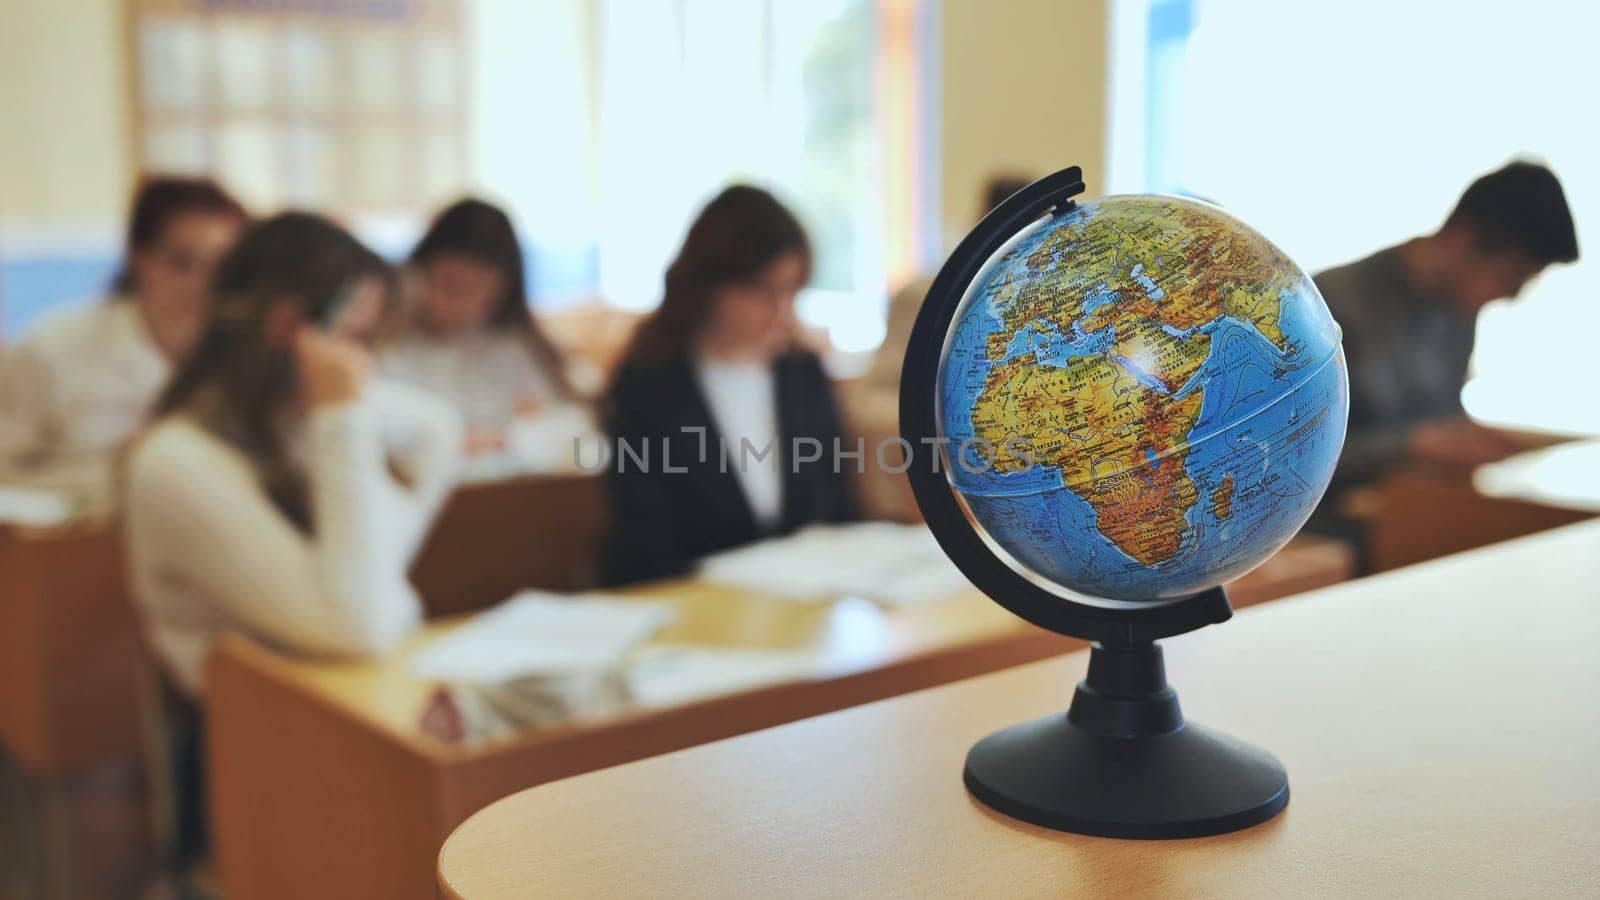 A globe of the world in a school classroom during a lesson. by DovidPro